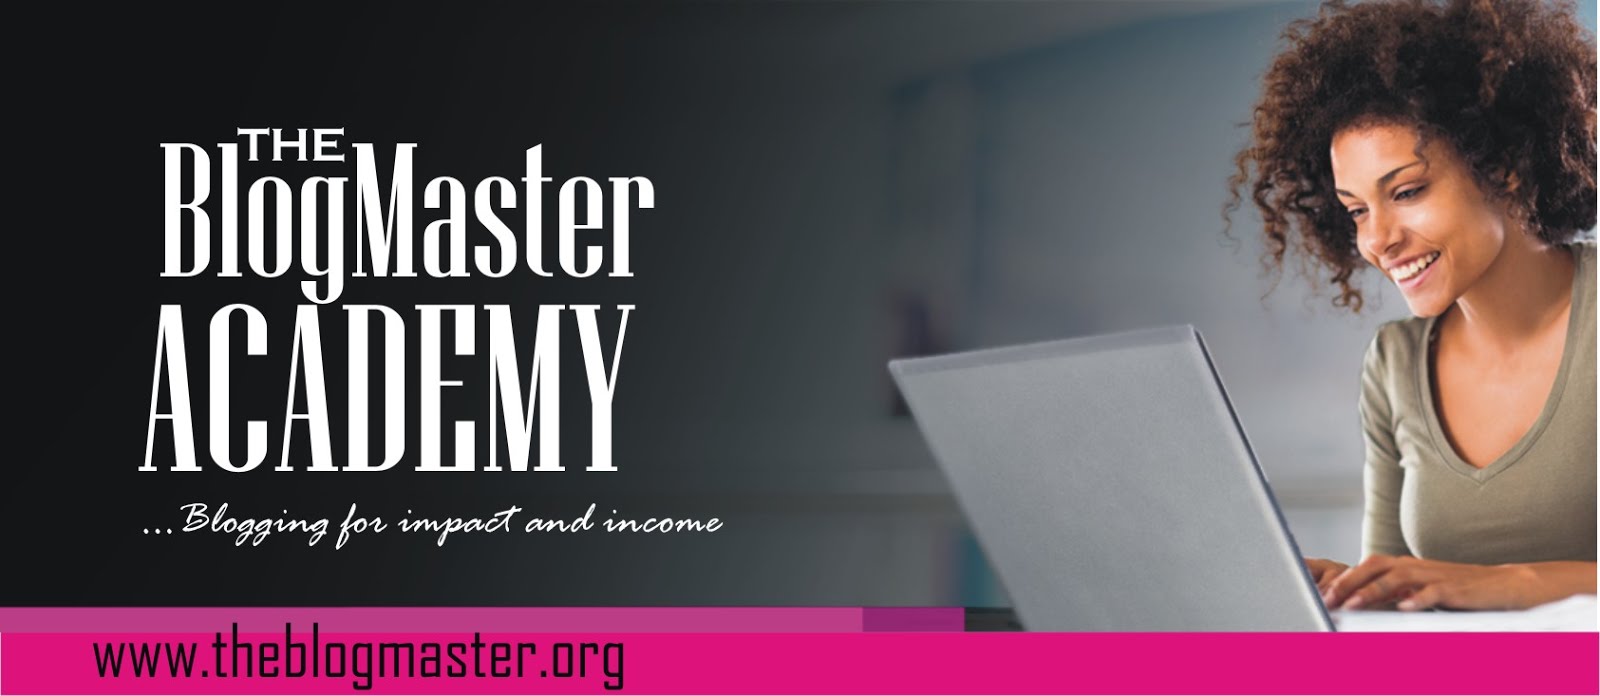 The BlogMaster Academy